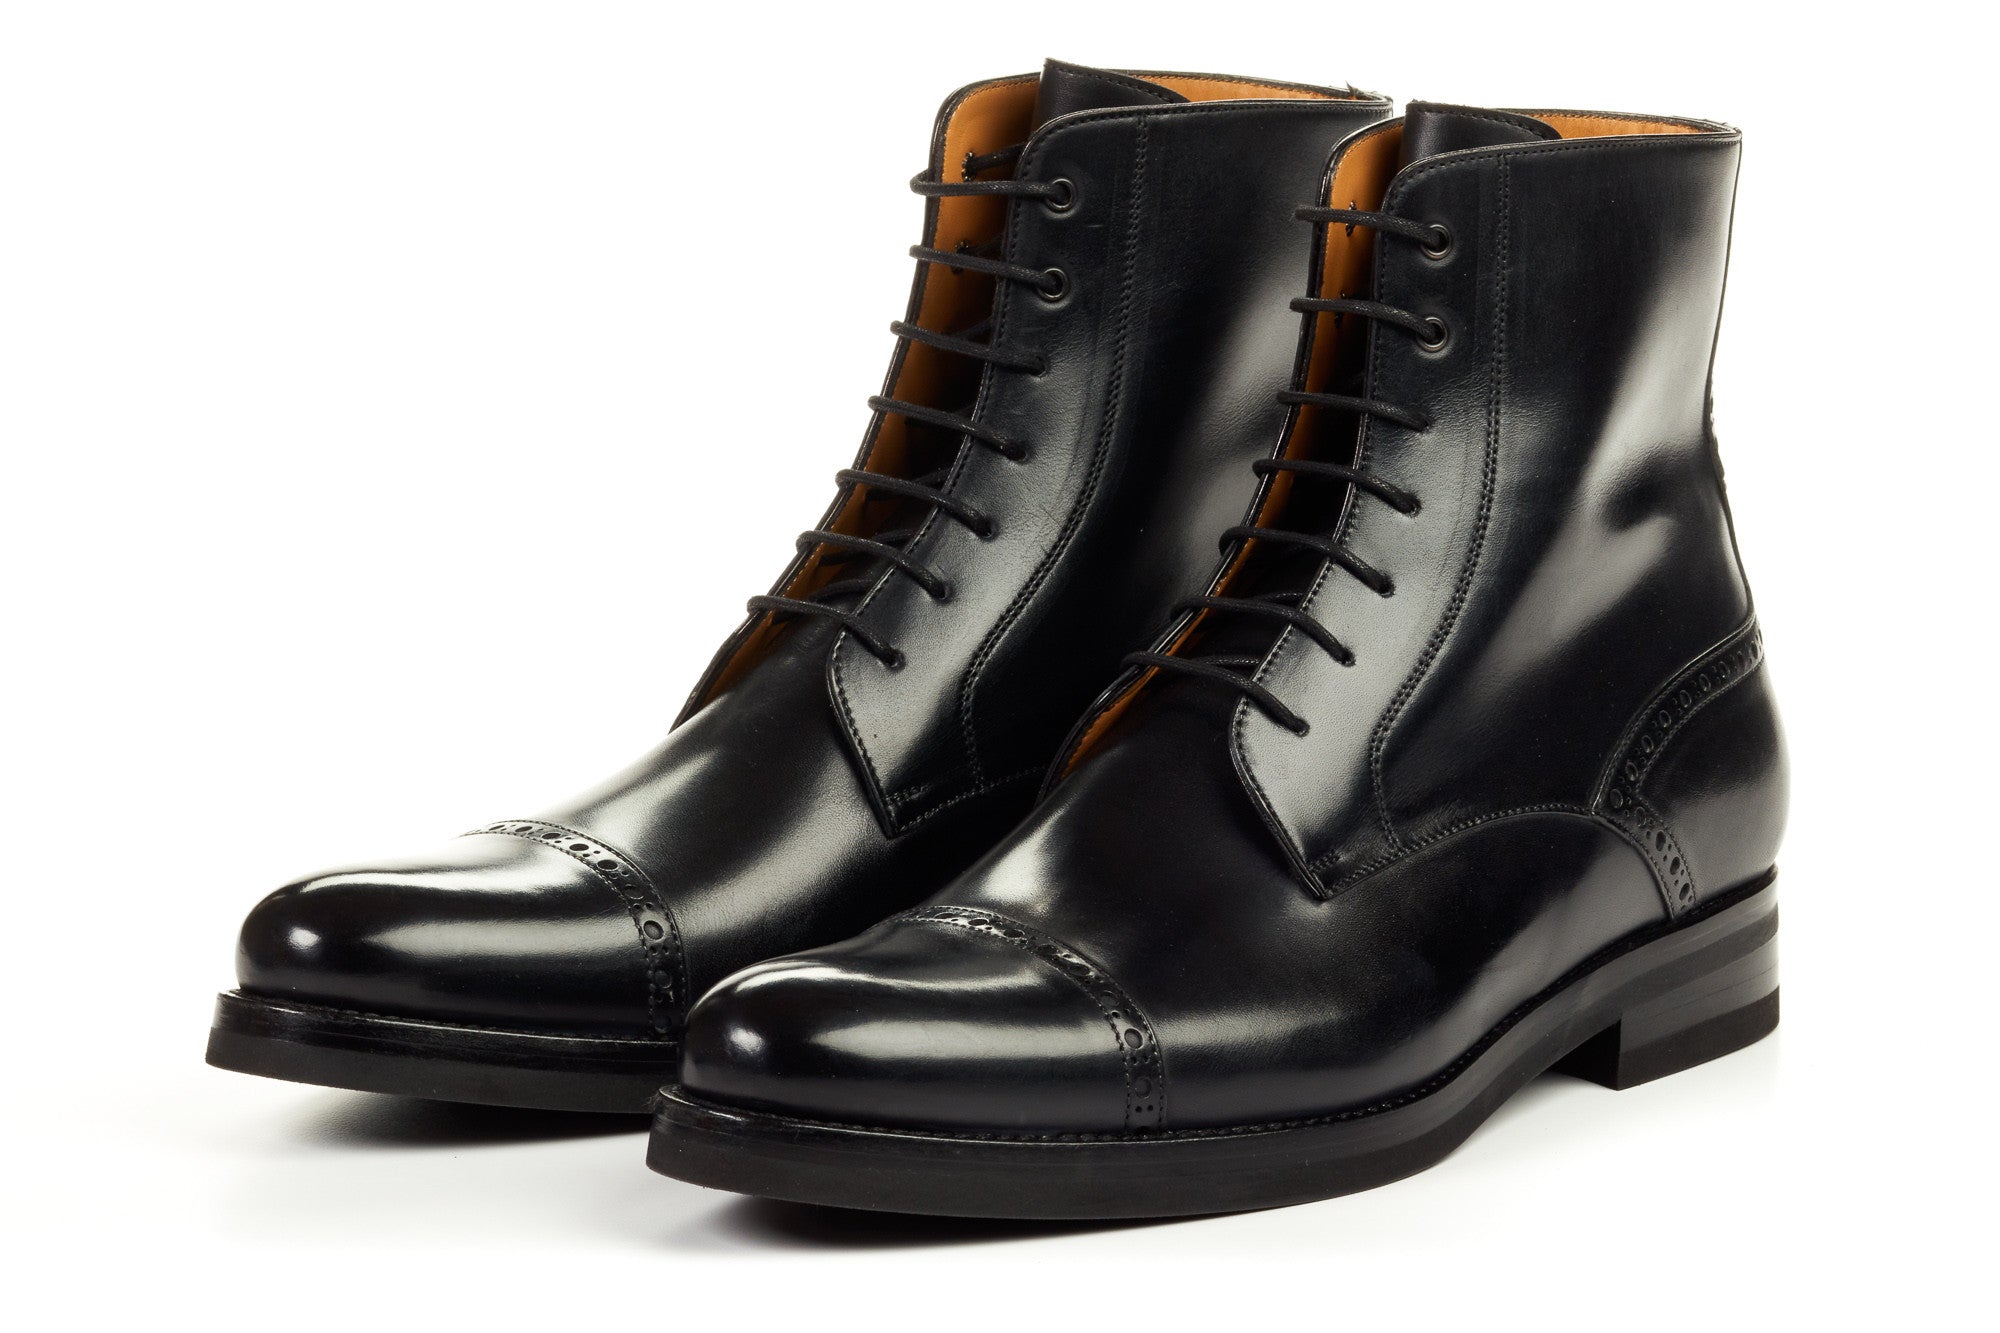 The Presley Lace-Up Boot - Nero - Rubber Sole